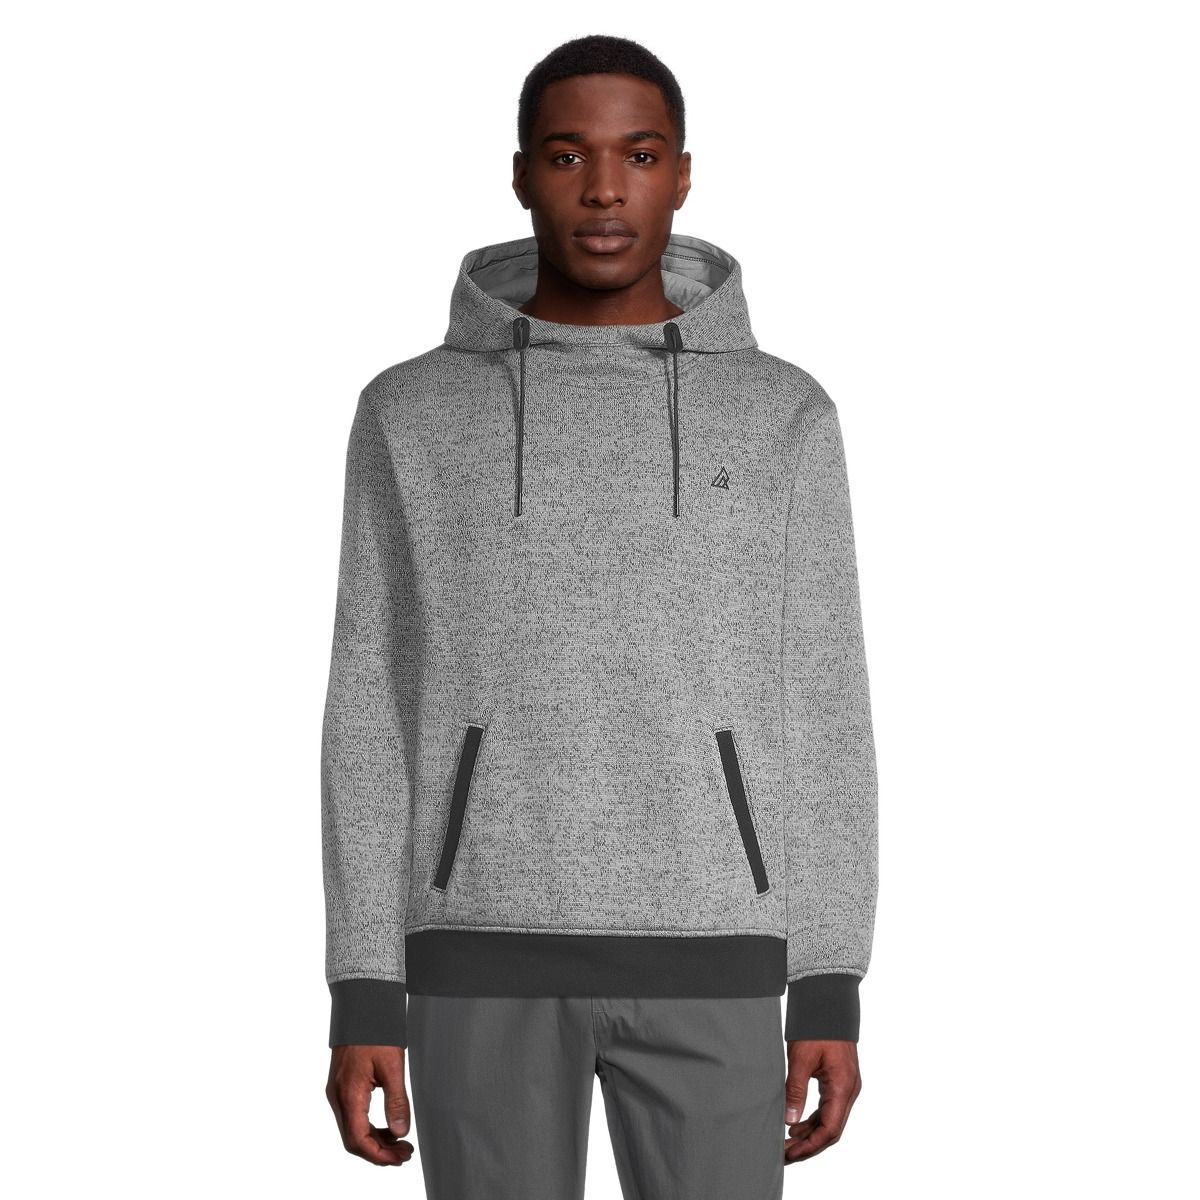 Ripzone Men's Cliff Pullover Hoodie